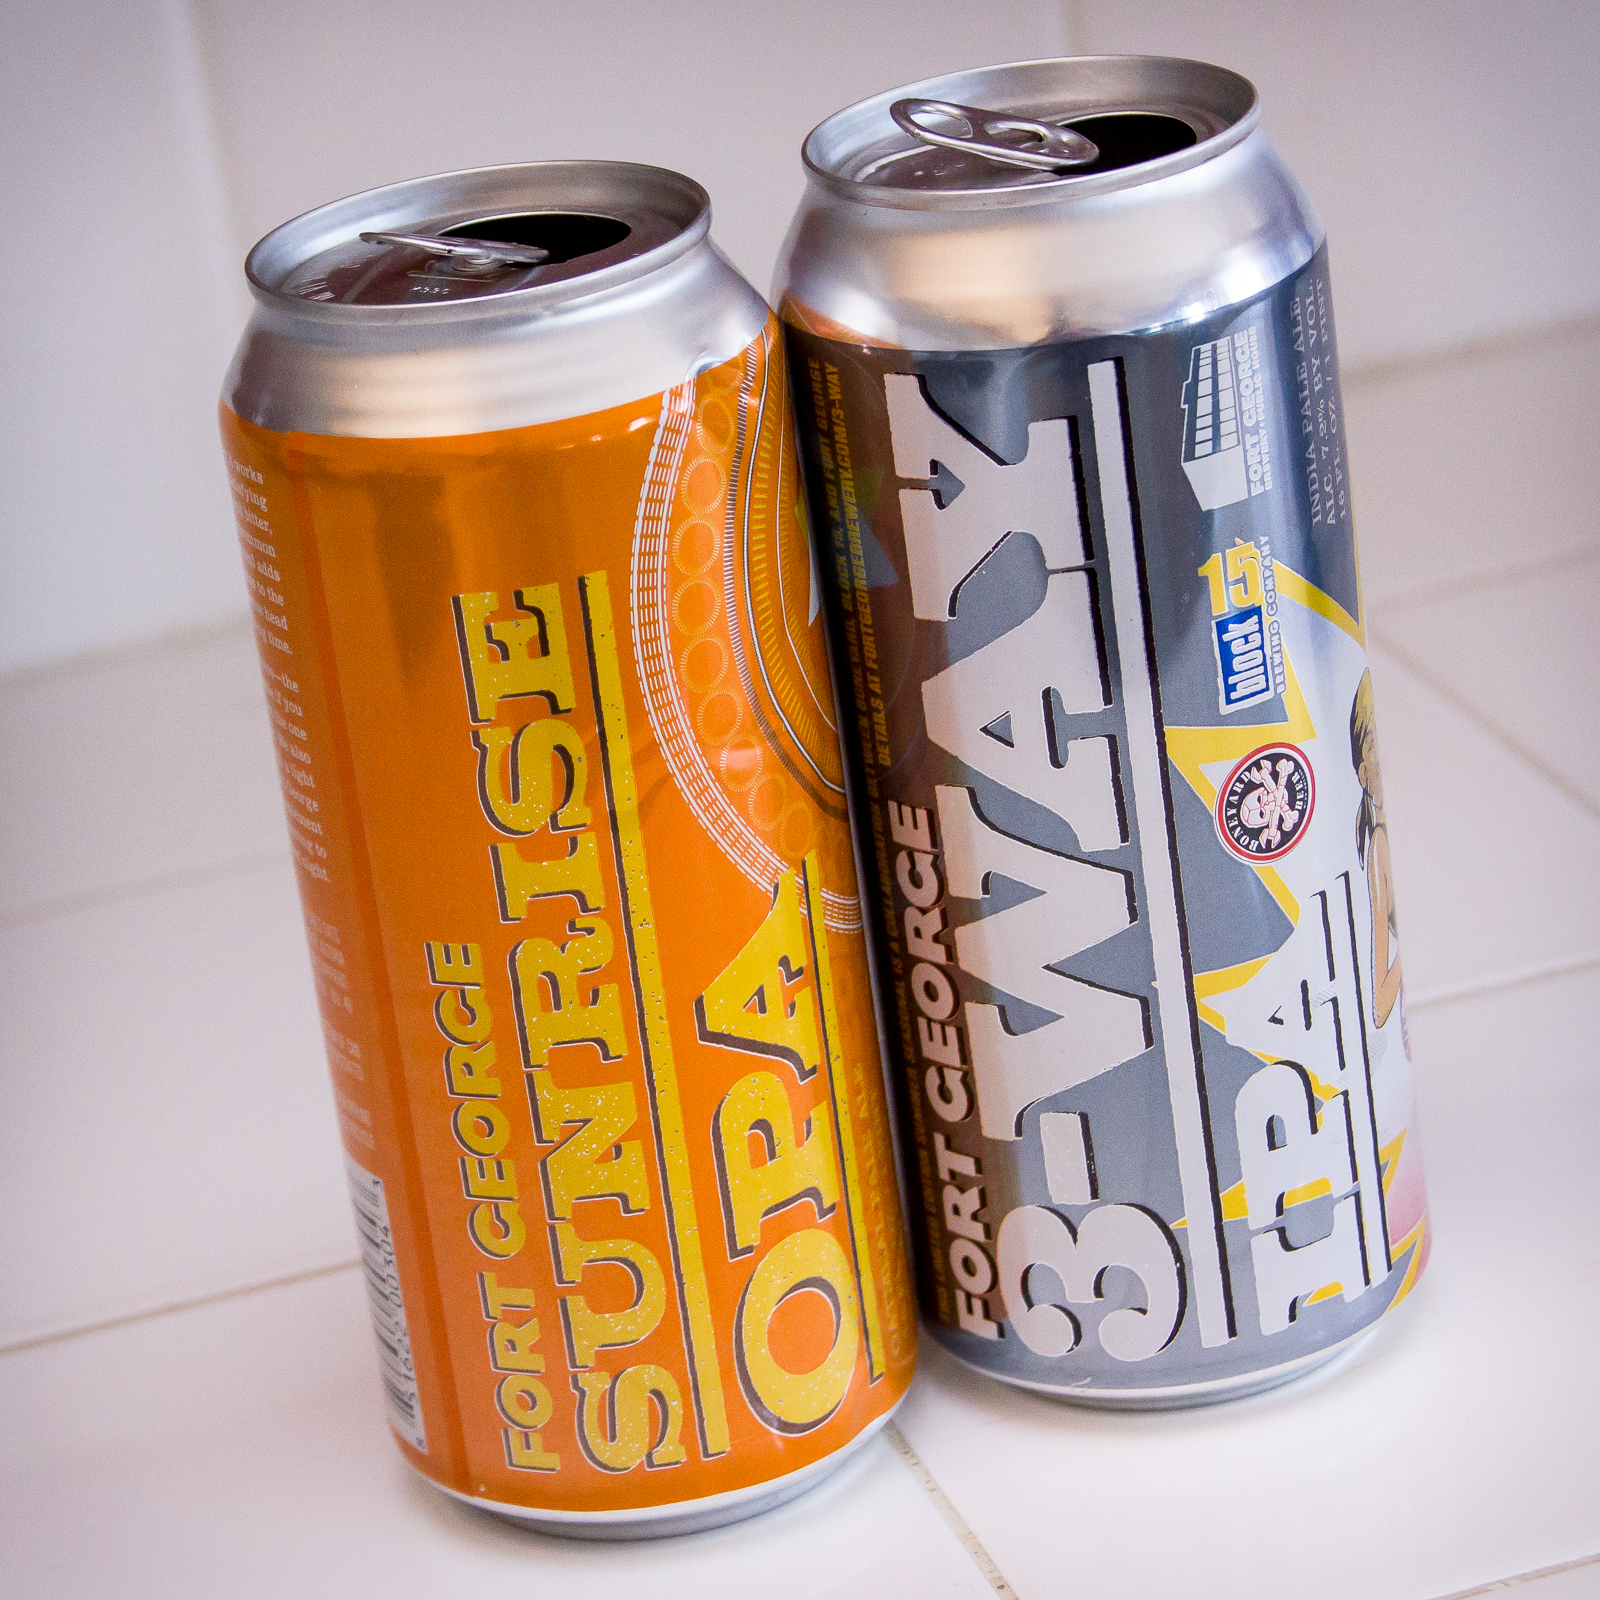 Fort George Brewery - Sunrise Oatmeal Pale Ale and 3-Way IPA